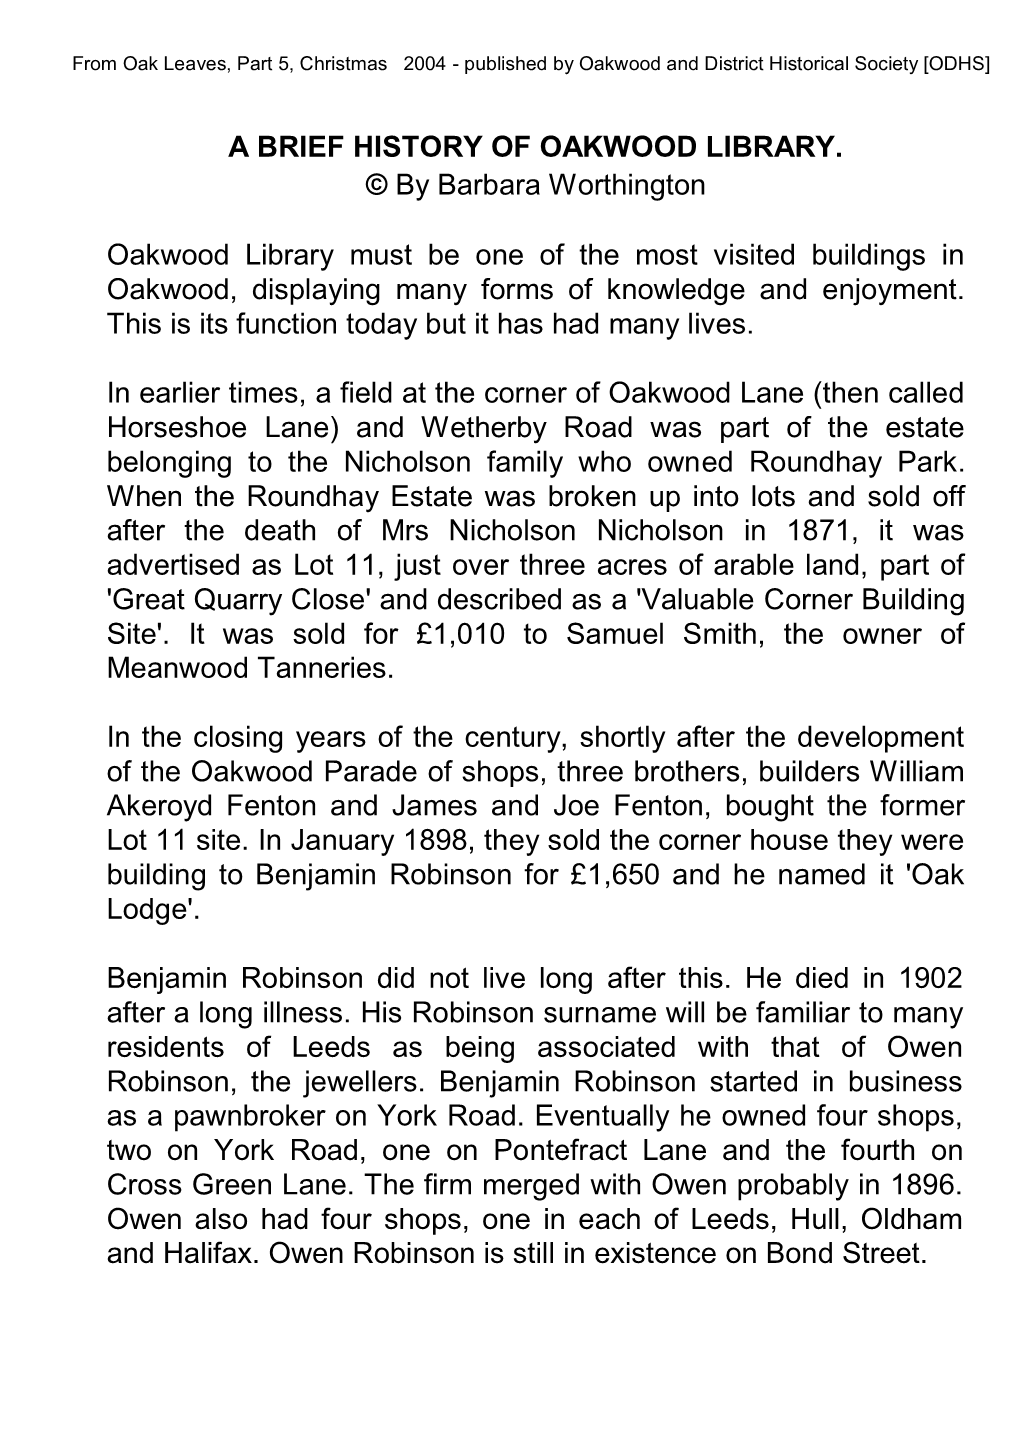 A Brief History of Oakwood Library